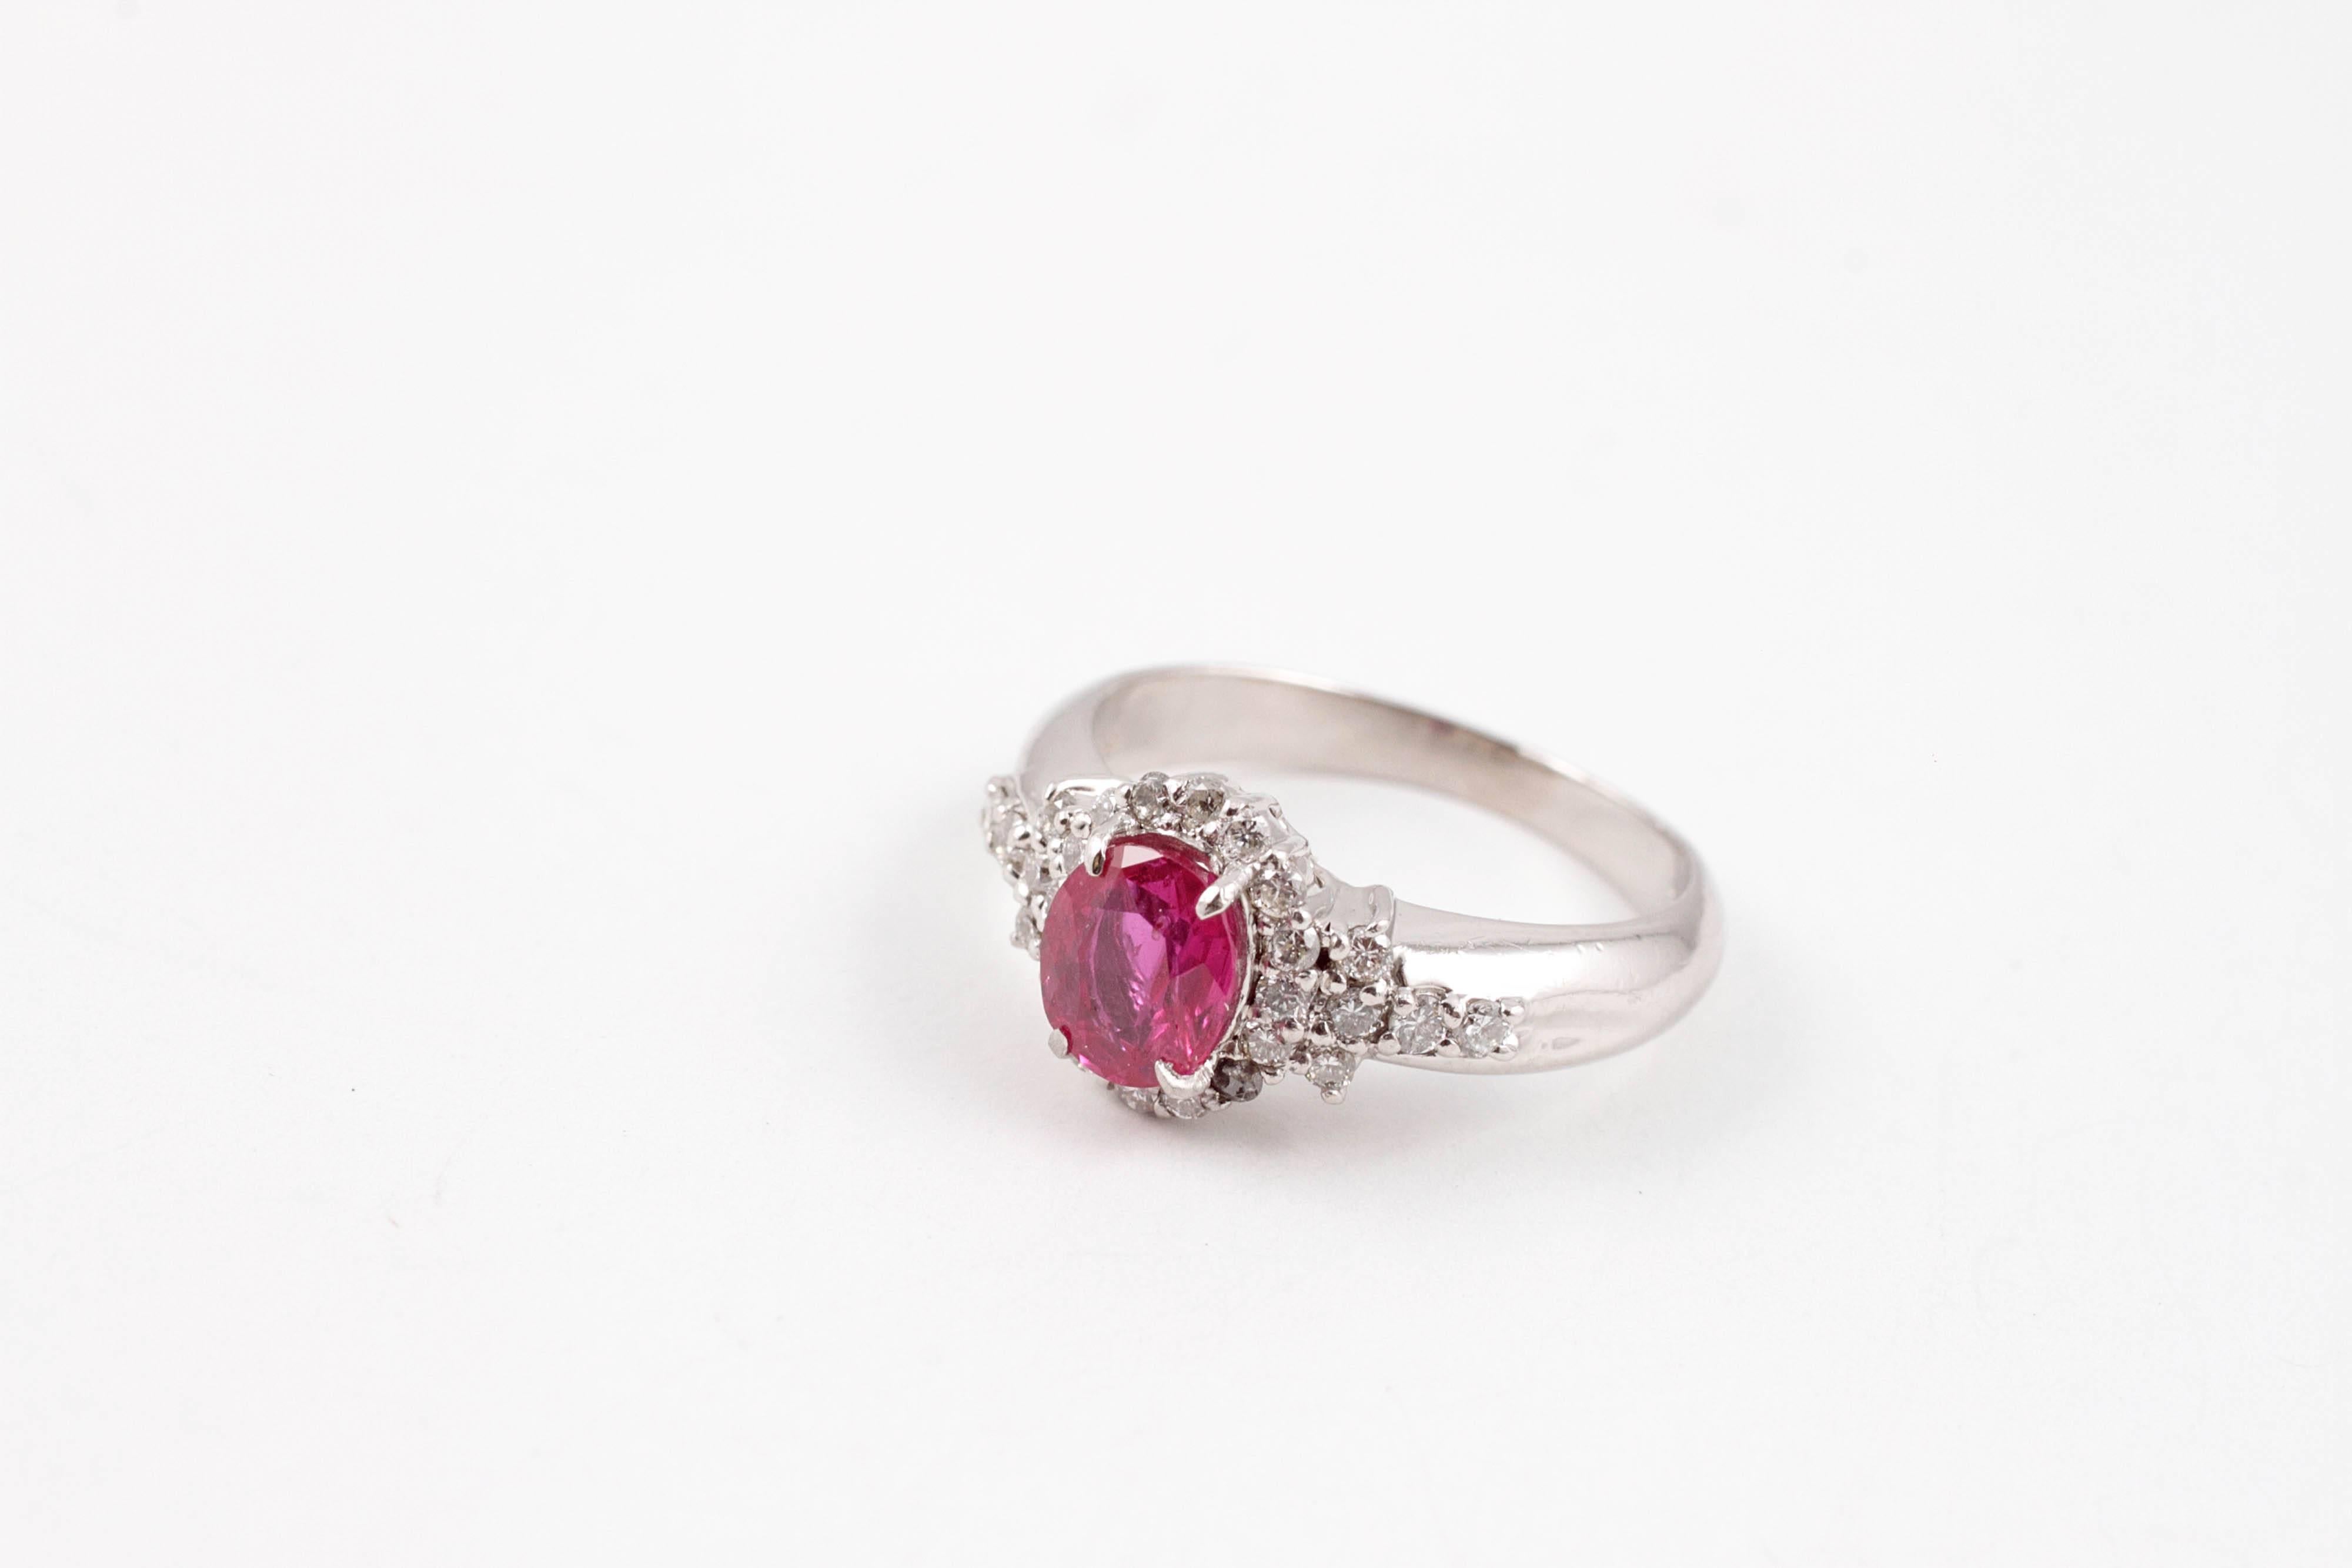 Composed in platinum, with a bright and shining 1.15 carat Burma ruby, flanked by 0.40 carats of diamonds.  

This ring is accompanied by Stone Group Labs Gemstone Identification and origin report stating the center stone to be 